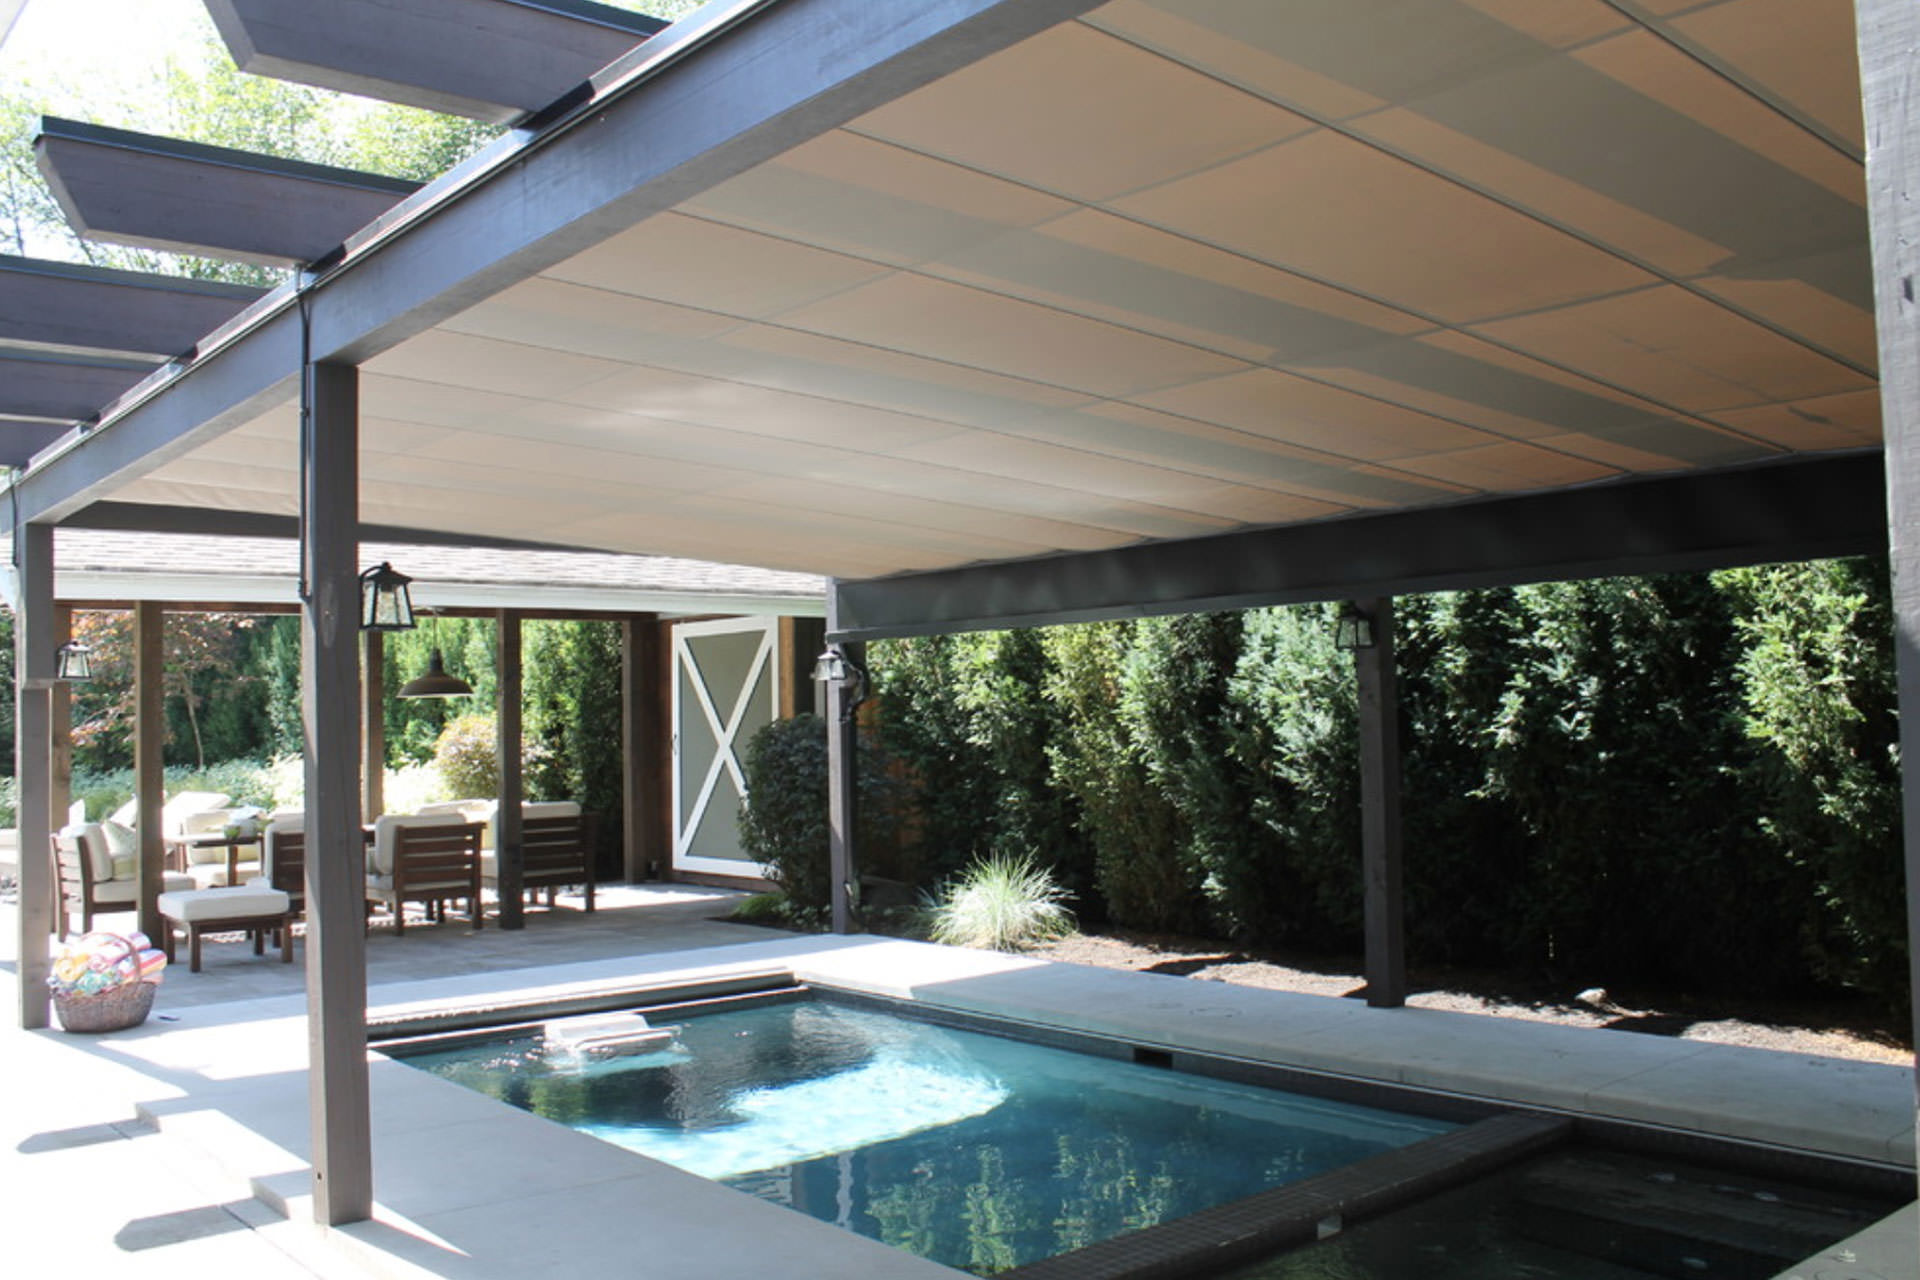 Pool Shade Ideas 7 Ways To Cover Your Swimming Pool